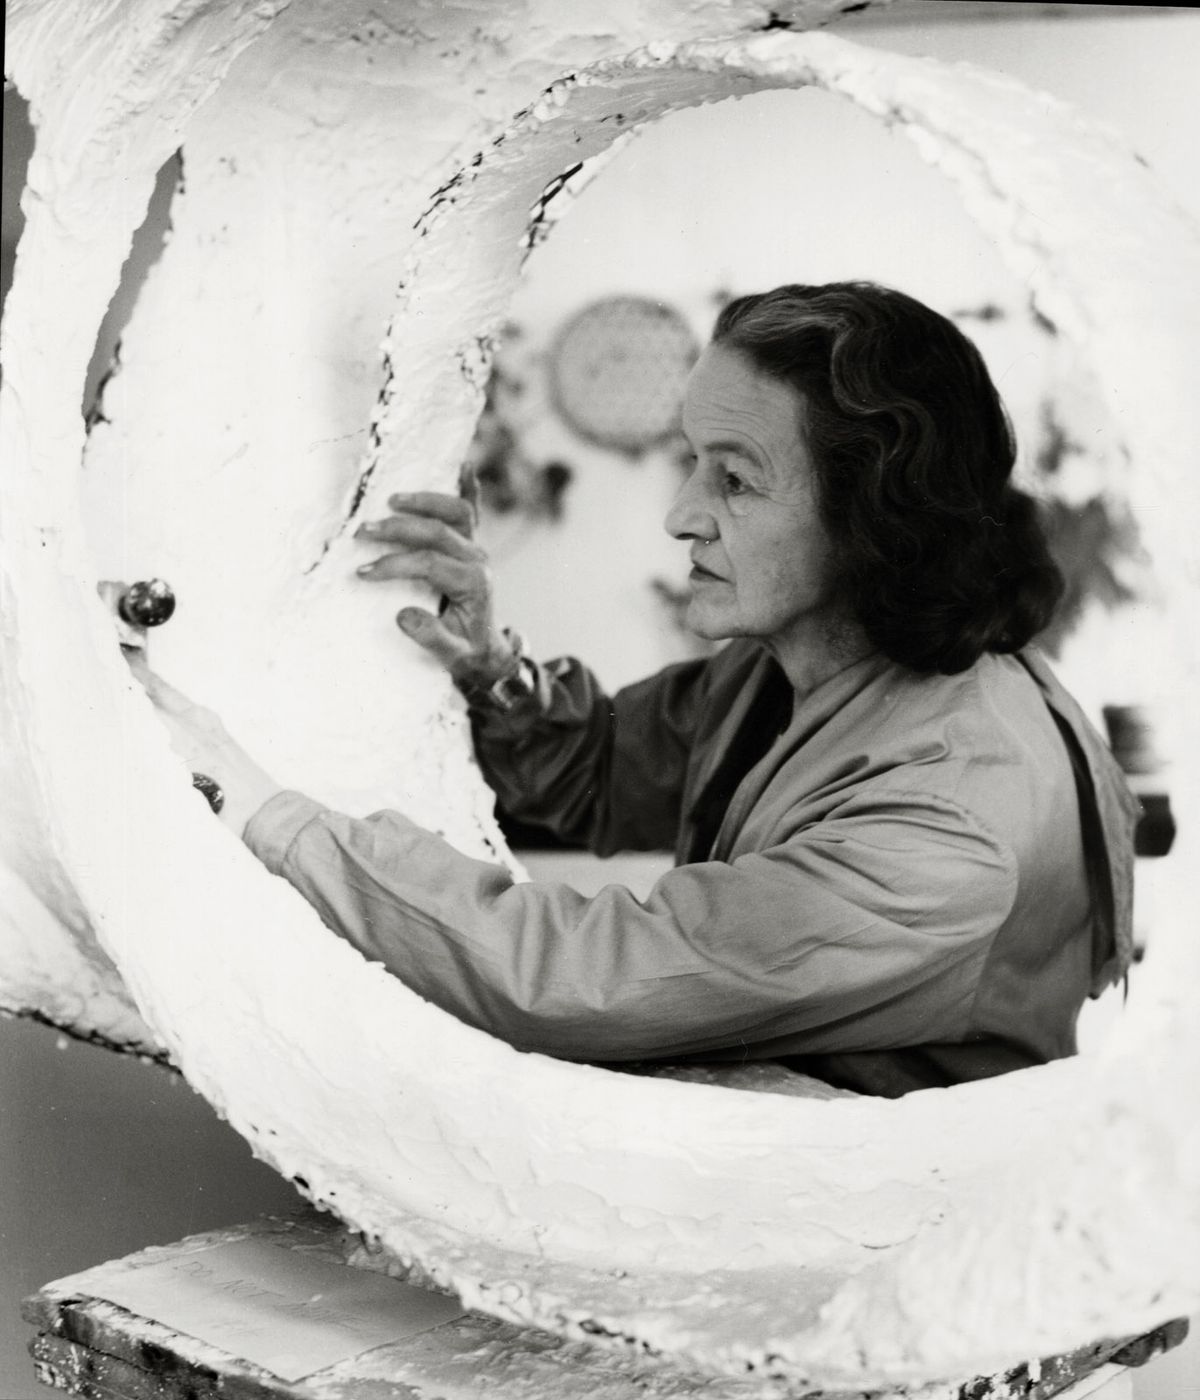 Barbara Hepworth at work in 1963 on the plaster for her sculpture Oval Form (Trezion) Photo: Val Wilmer; © Bowness, Hepworth Estate